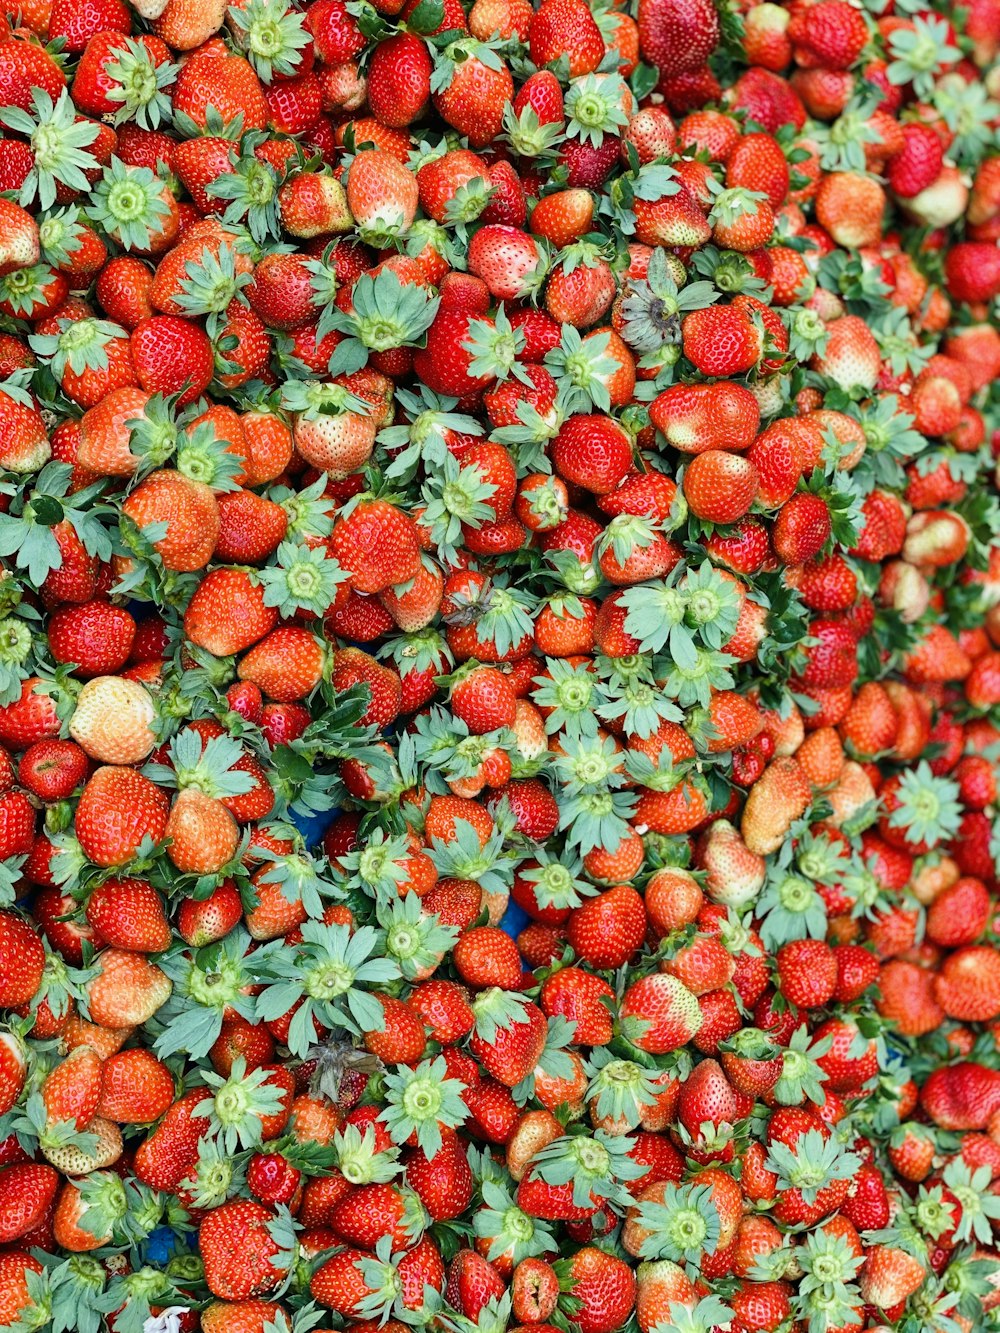 a large amount of strawberries are piled together